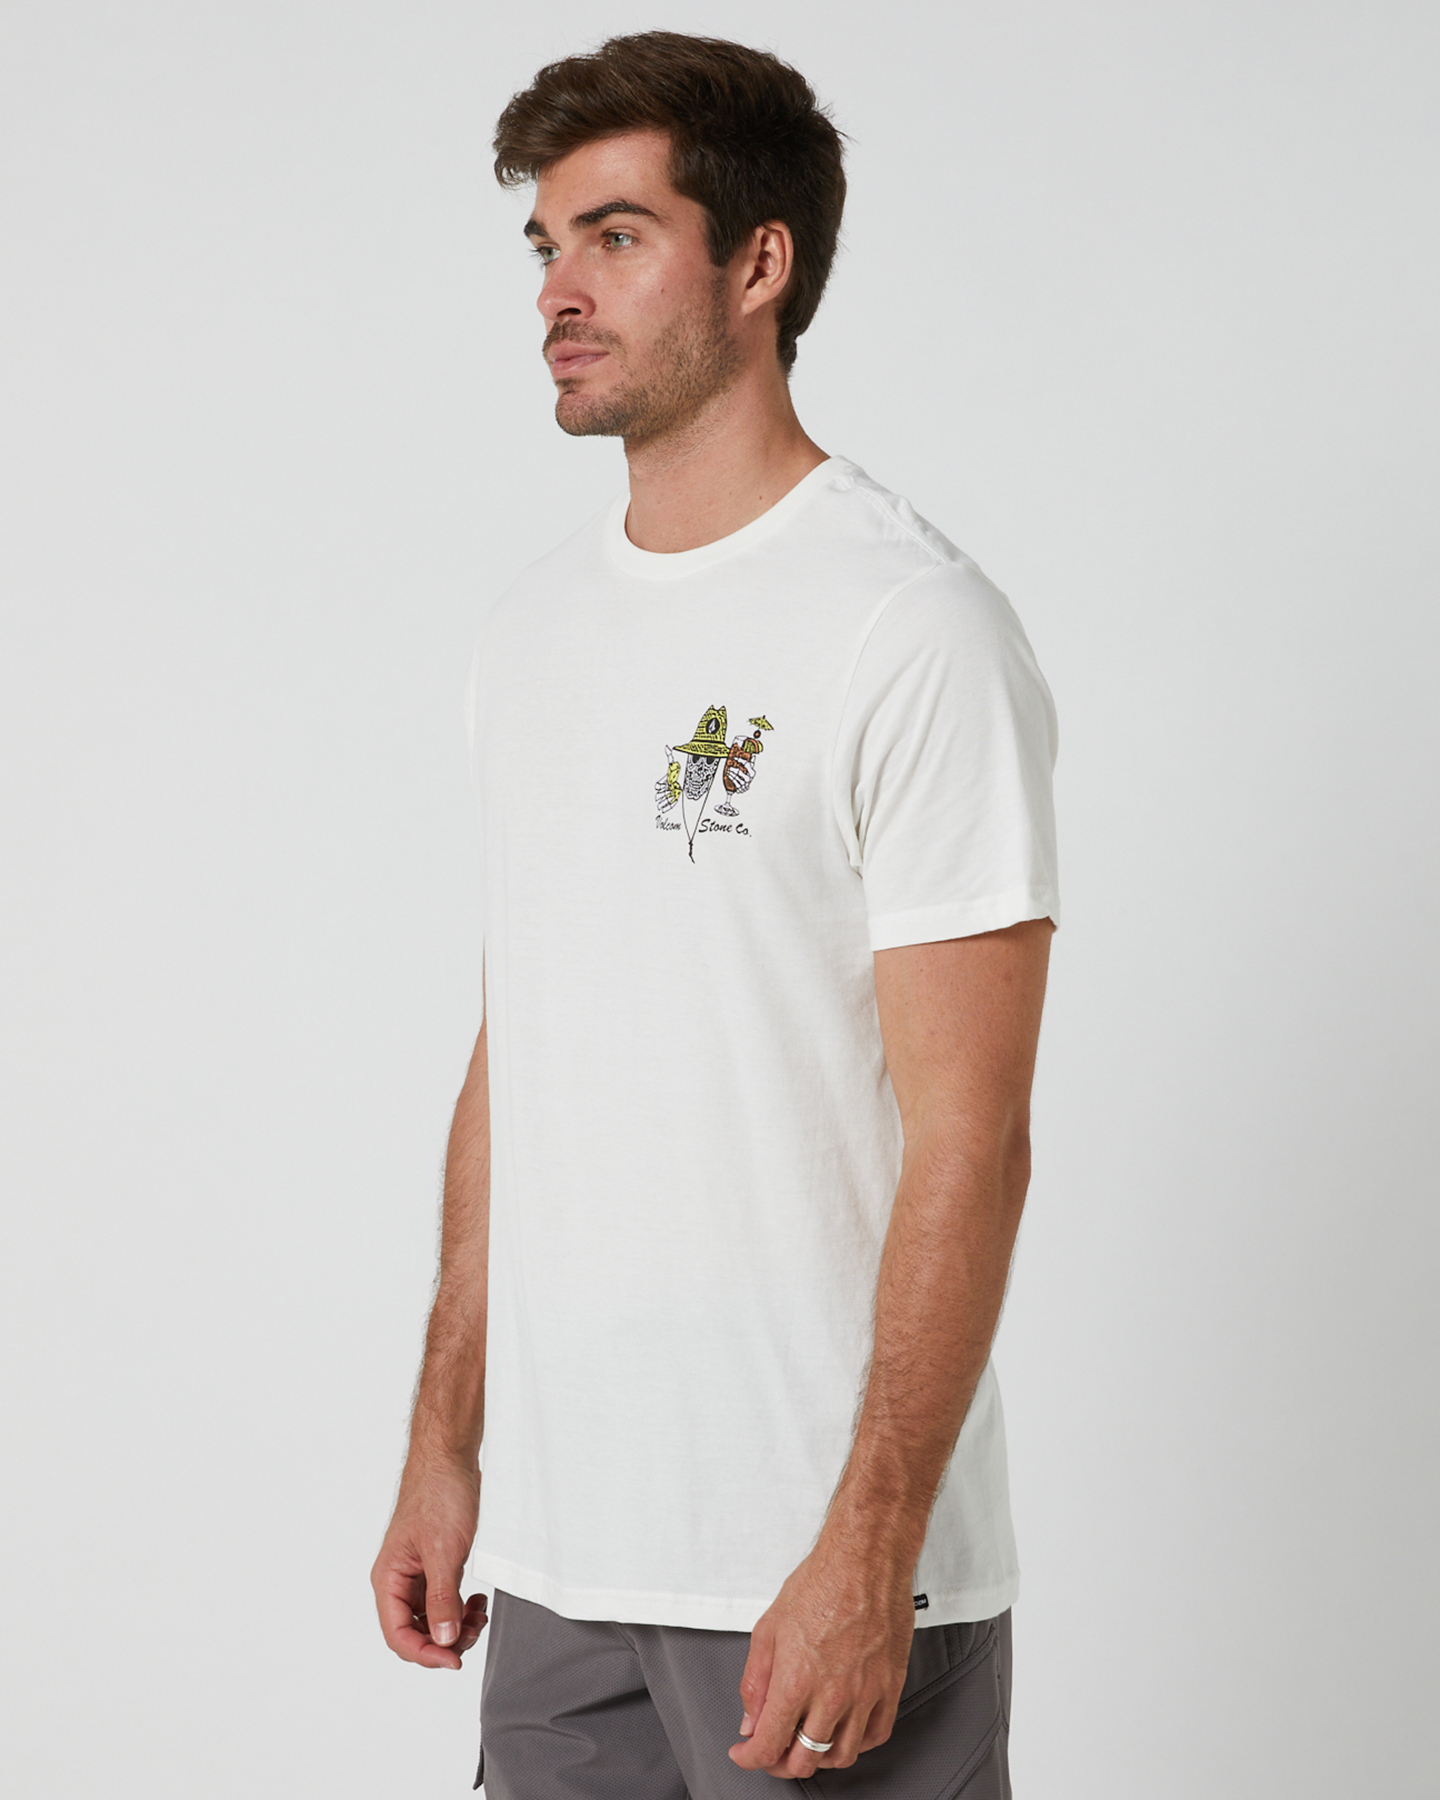 Volcom Pair A Dice Ss Tee - Off White | SurfStitch